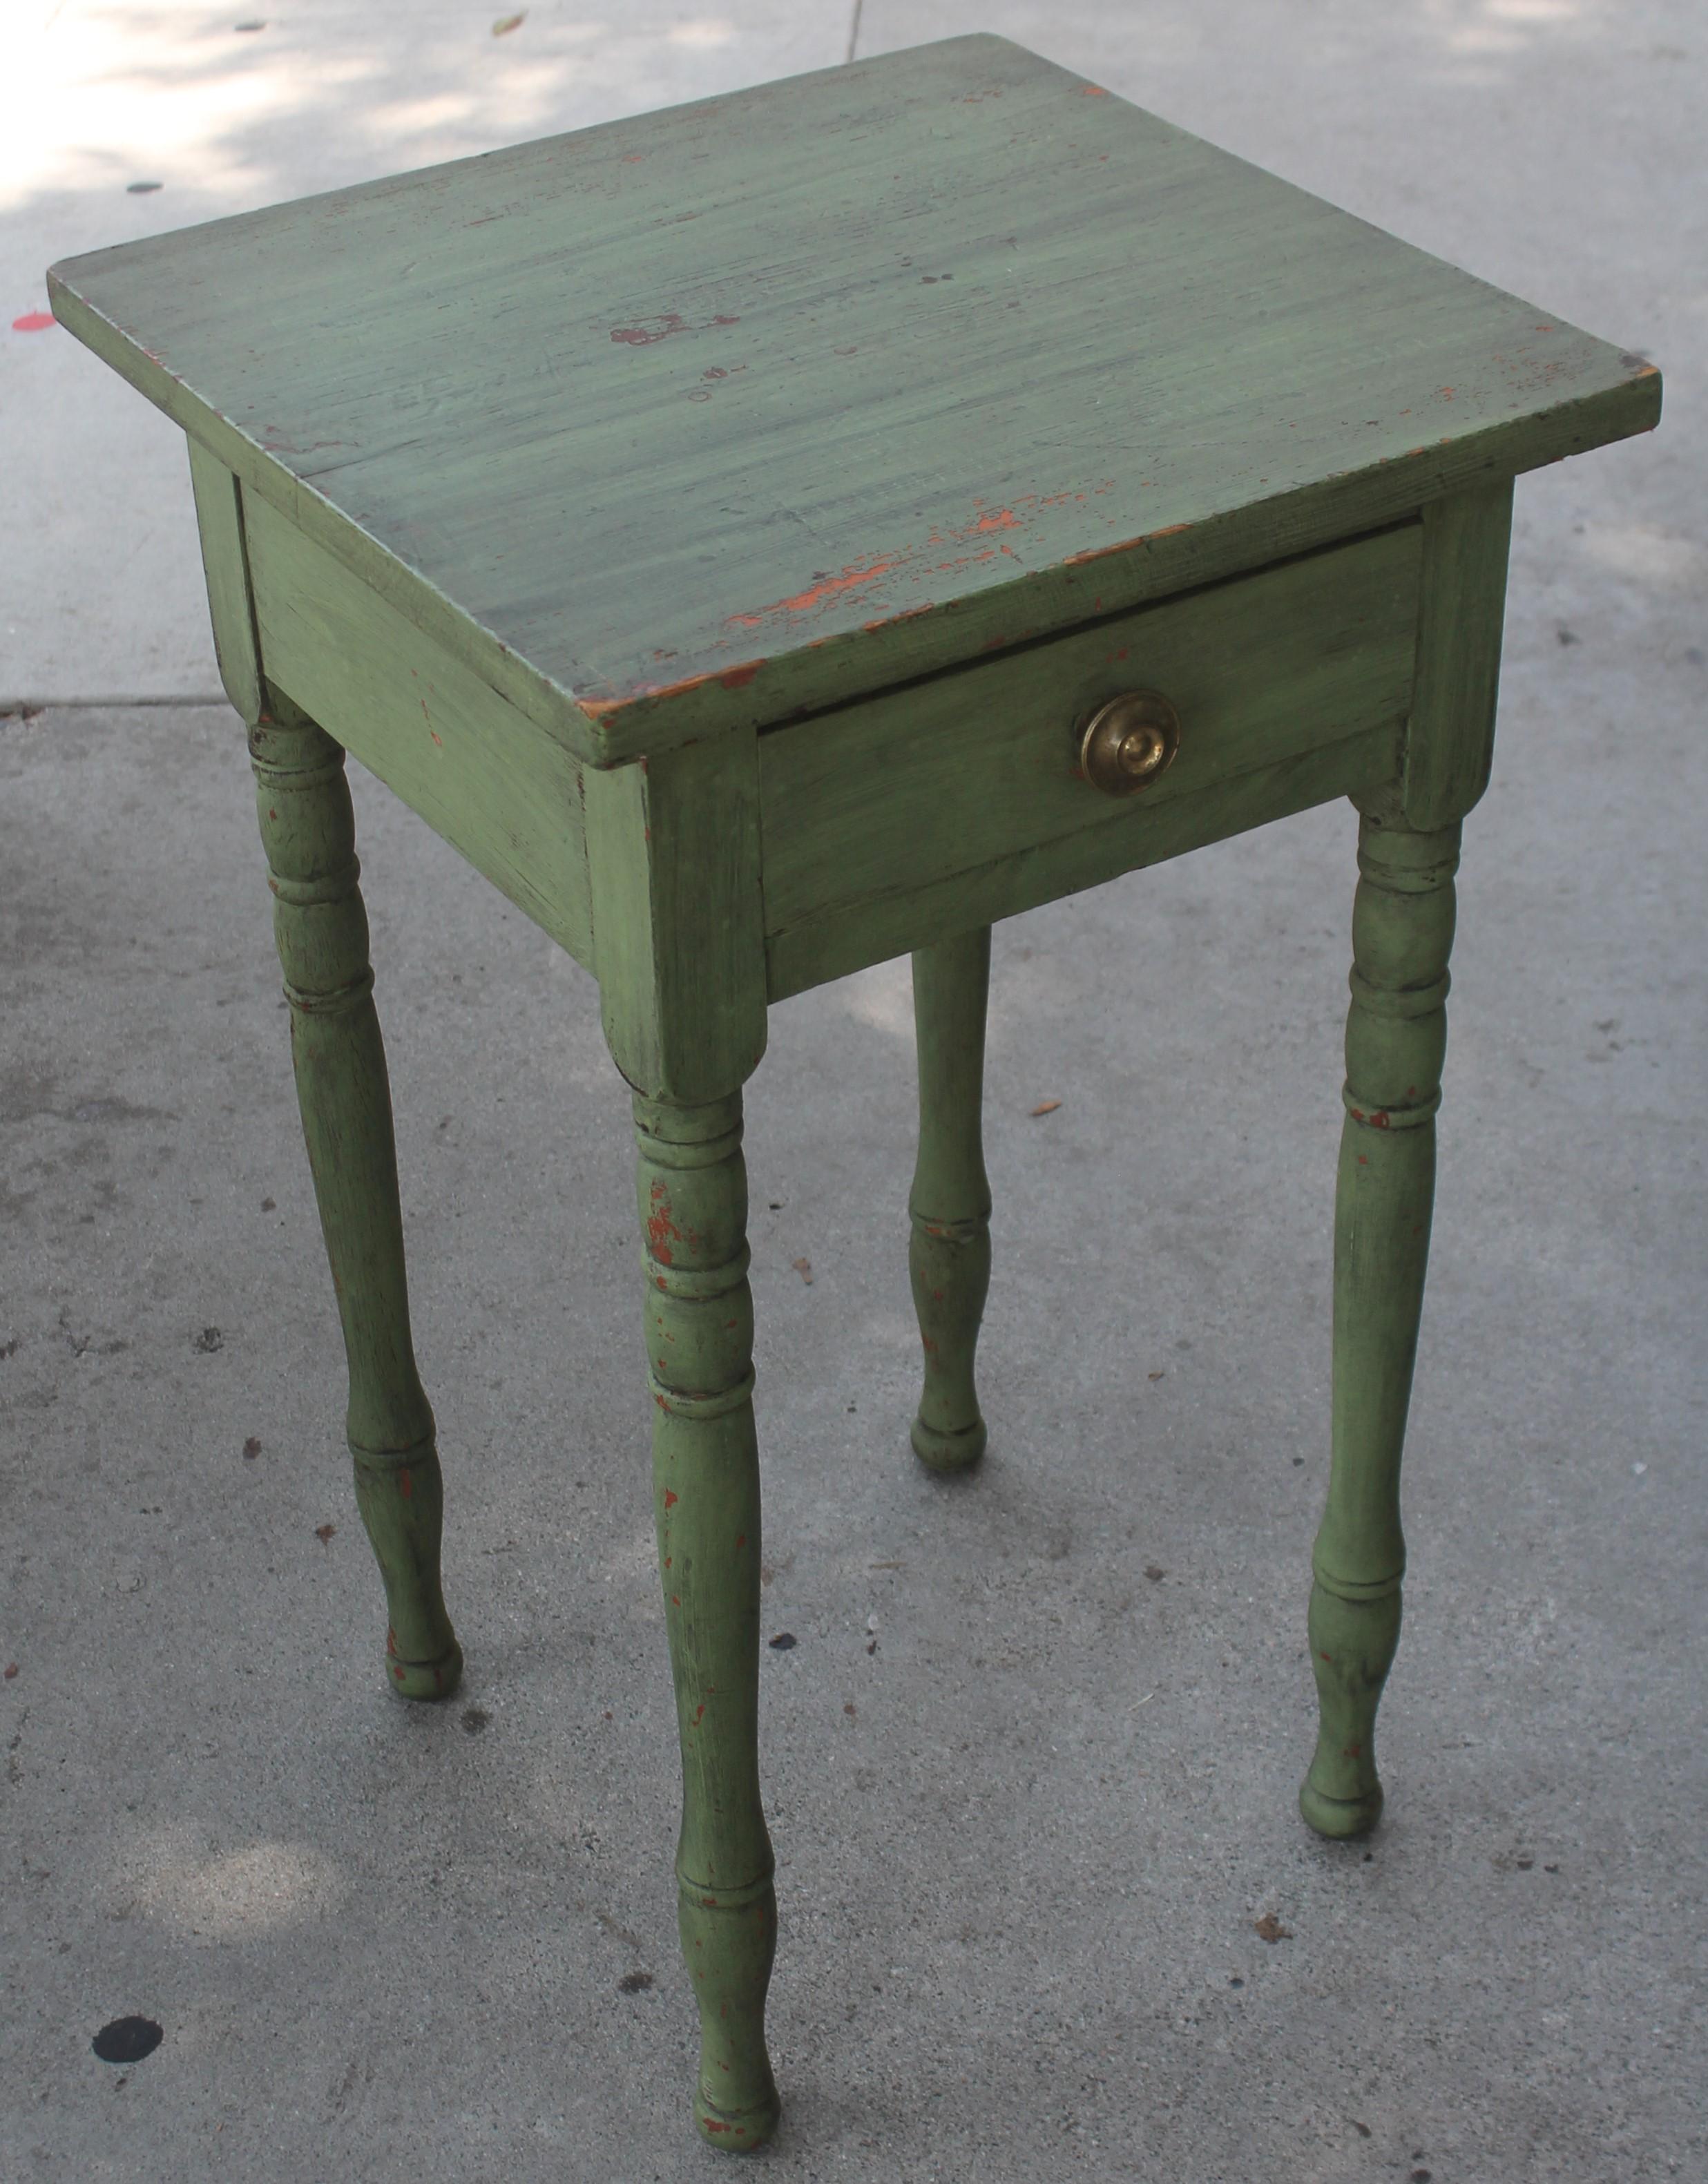 19thc original green painted one drawer stand in fantastic condition. This was found in a collection in Lancaster County, Pennsylvania. Amazing green over red painted surface.